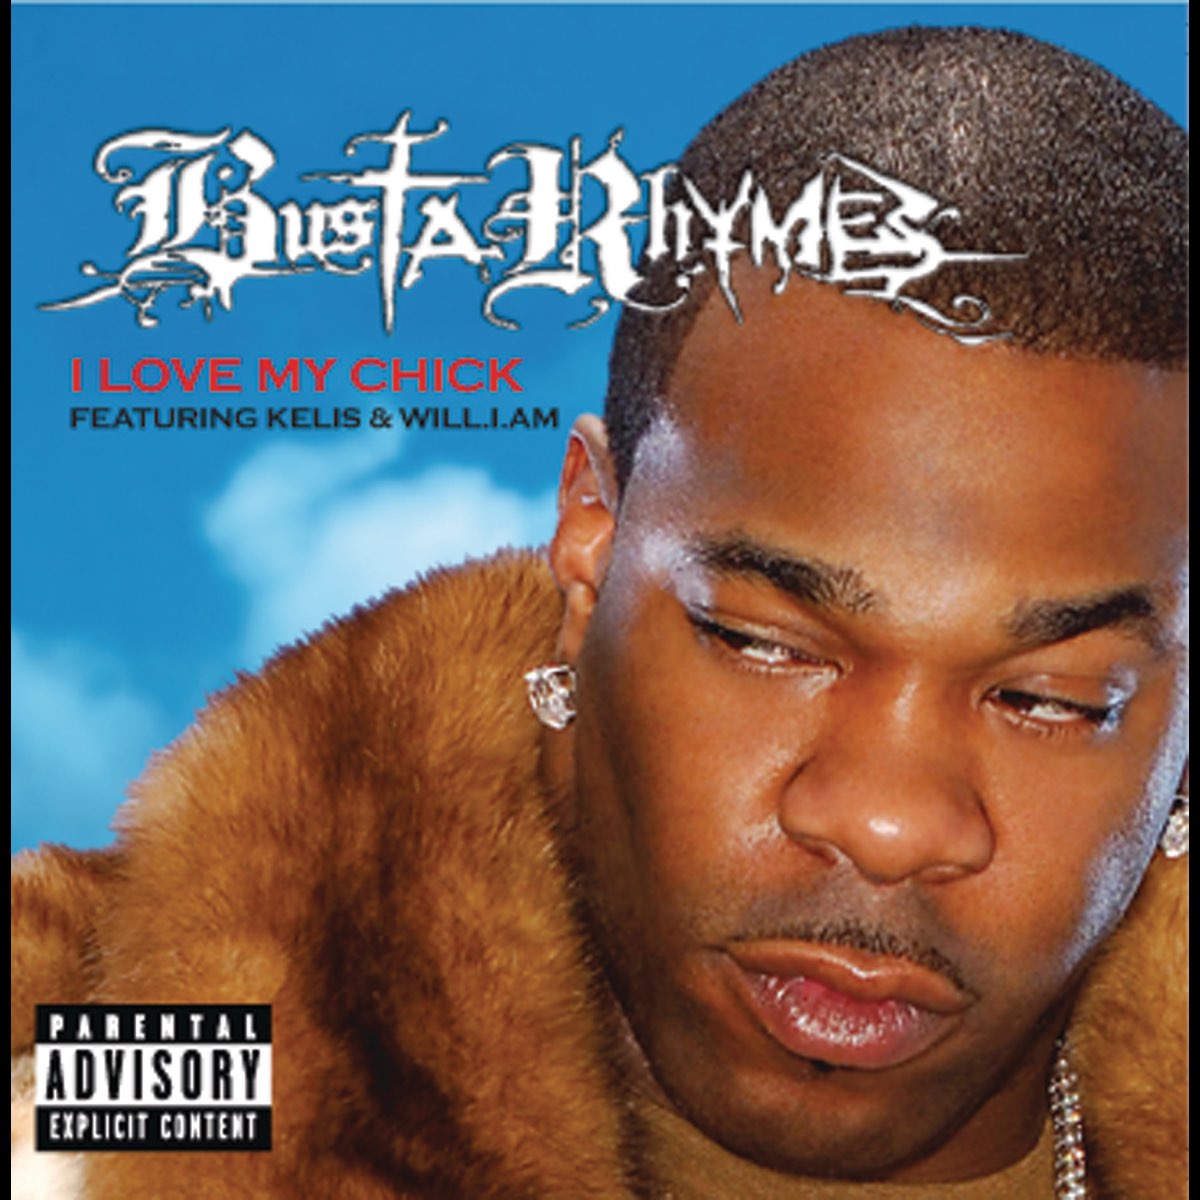 Busta Rhymes featuring will.i.am & Kelis — I Love My Bitch cover artwork